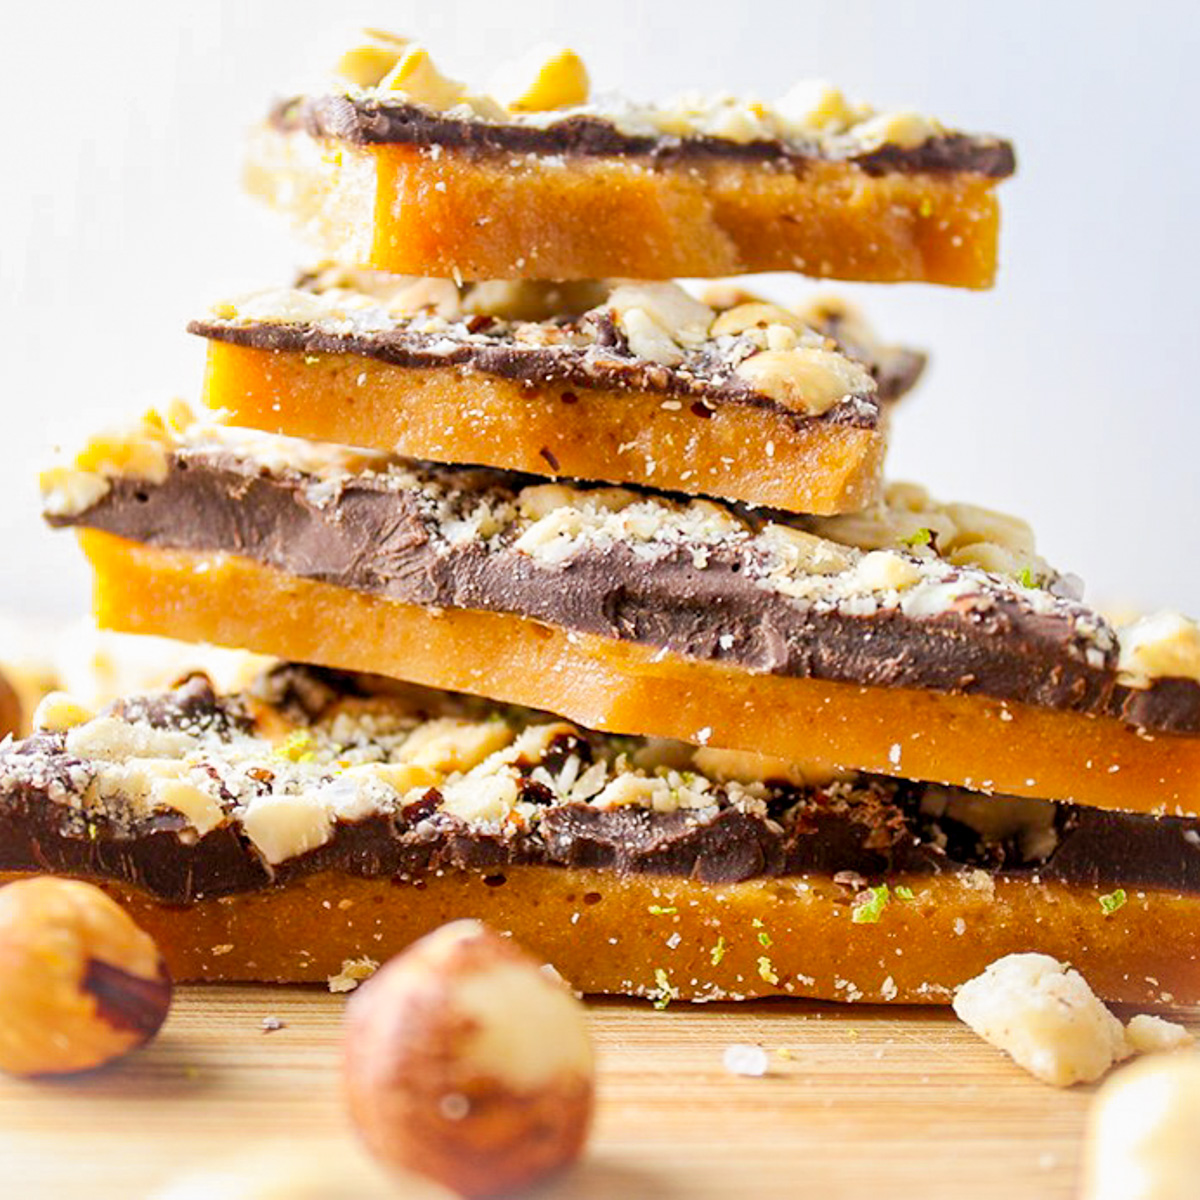 Chocolate Covered Toffee With Hazelnuts